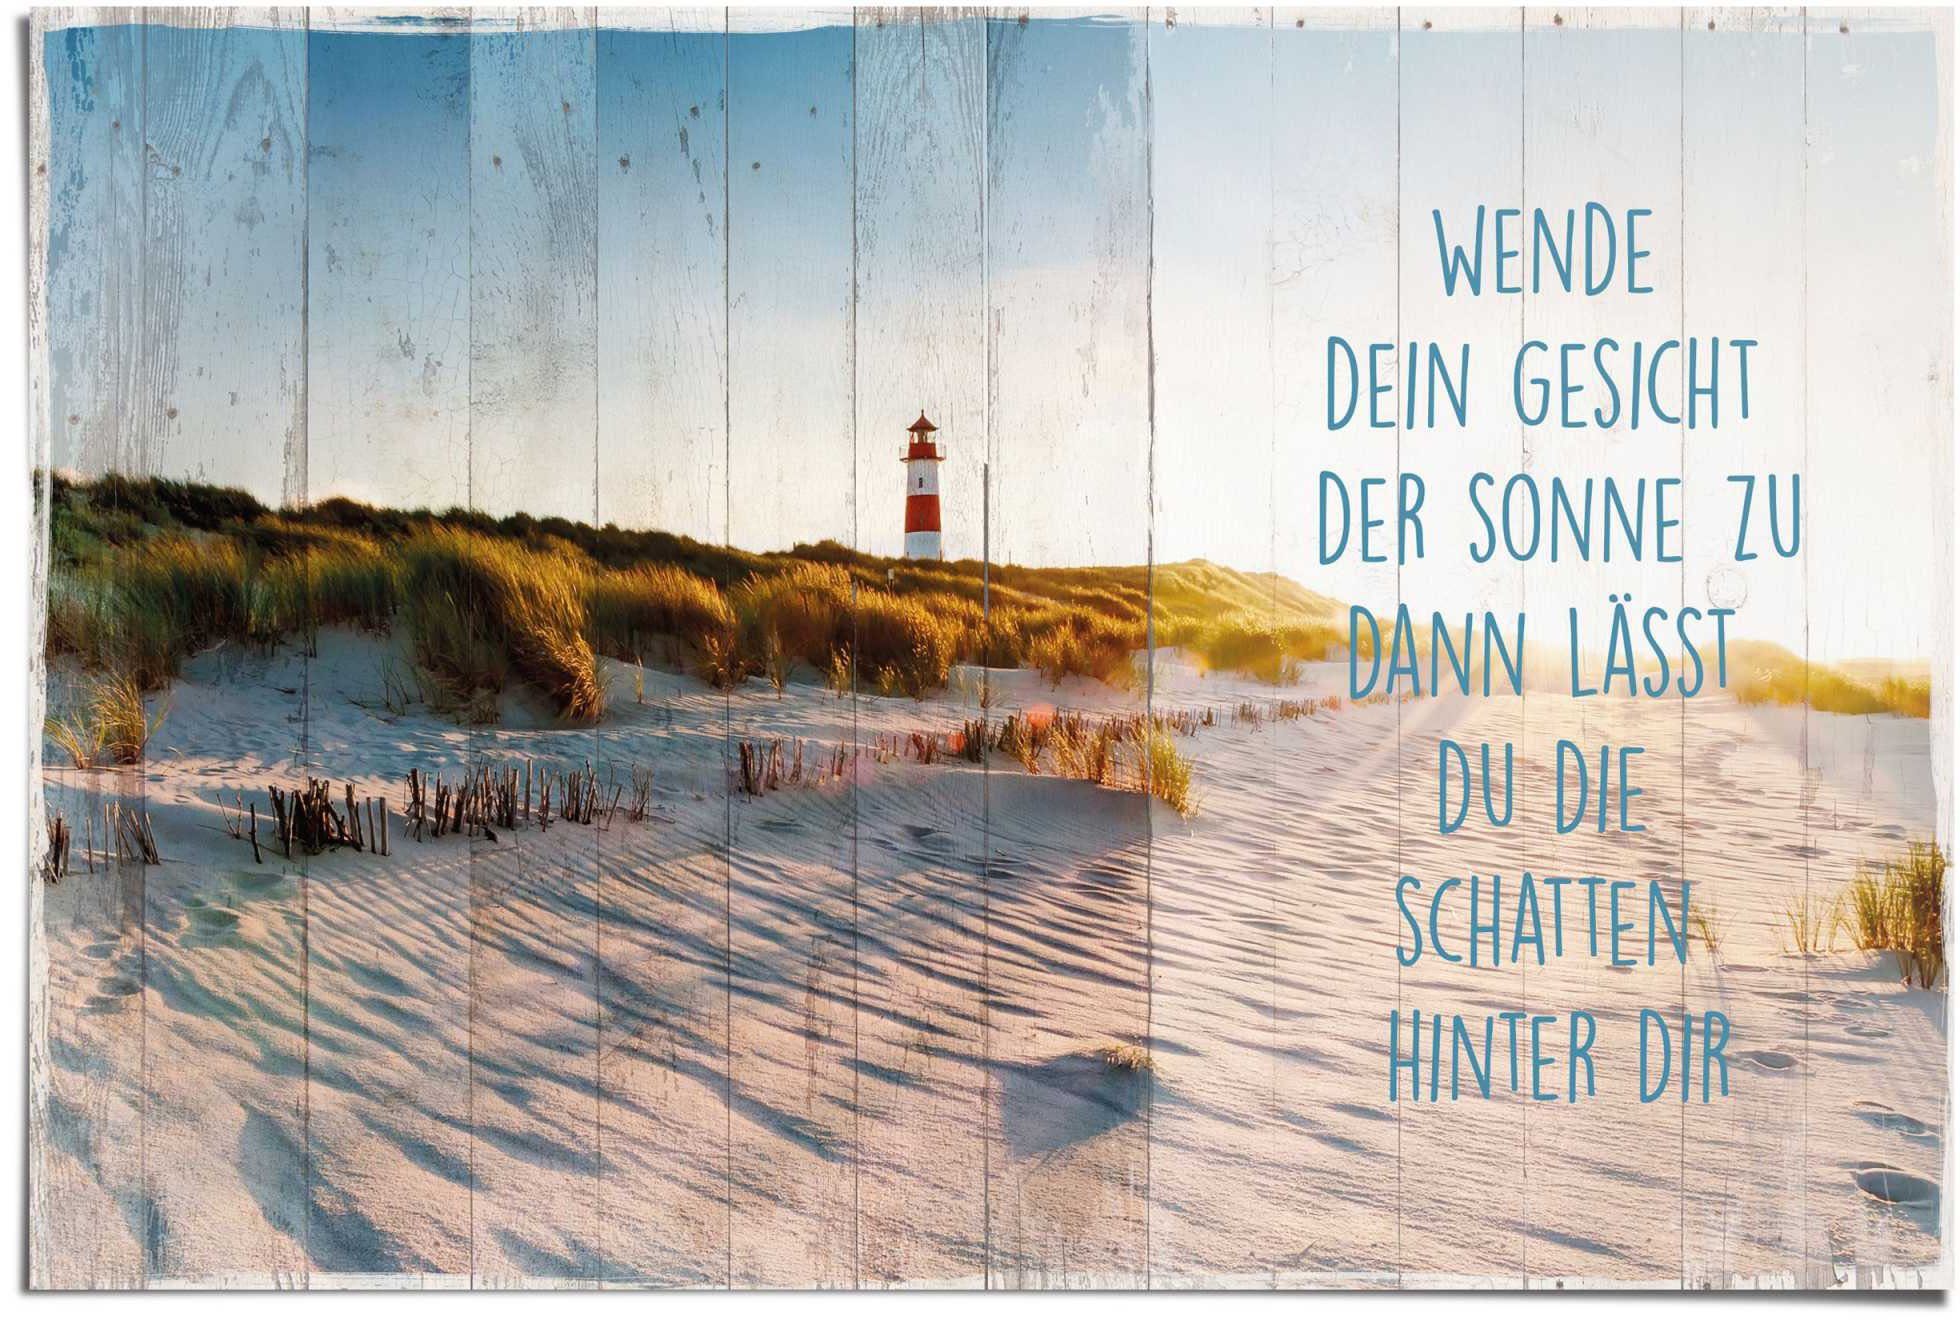 (1 Sonne am Reinders! Poster Strand, St)